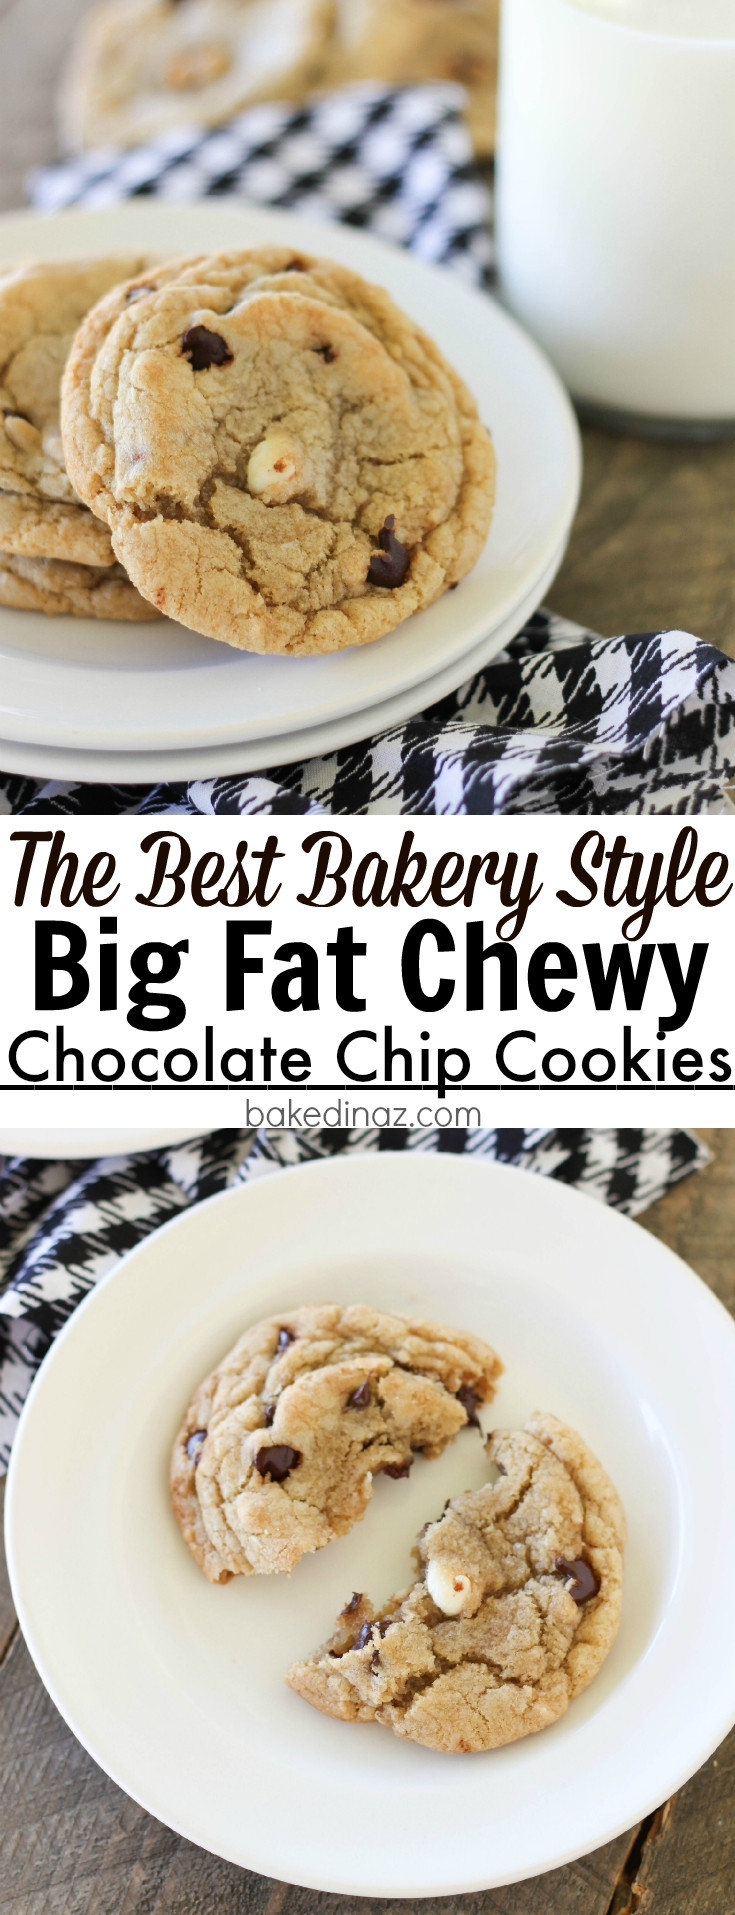 Big Fat Chewy Chocolate Chip Cookies
 The Best Big and Chewy Chocolate Chip Cookies